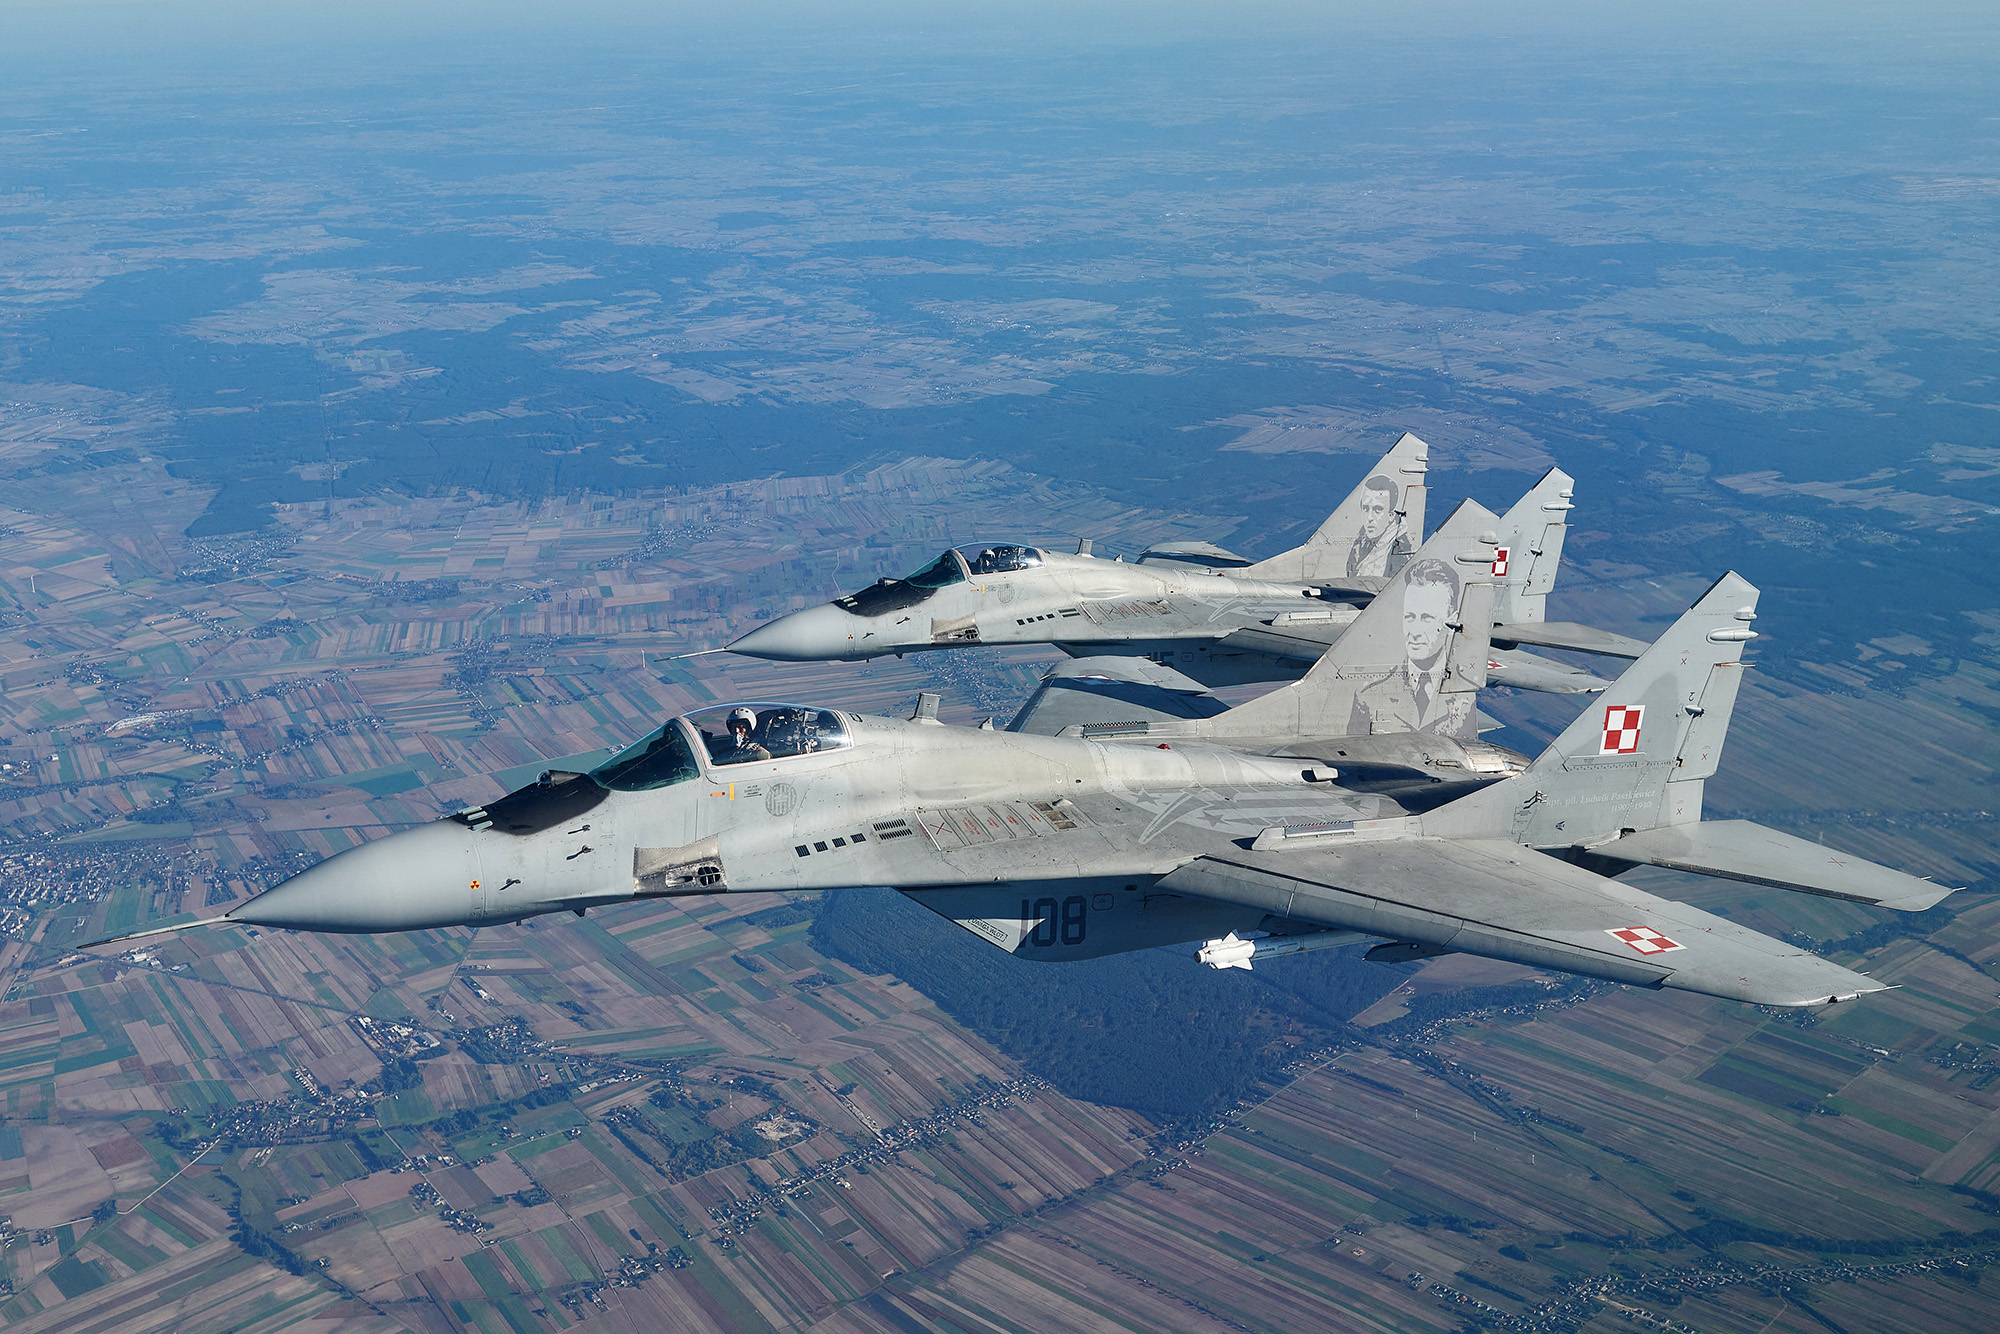 Two Polish MiG 29 fighter jets take part in the NATO Air Shielding exercise near the air base in Lask, central Poland, on October 12.